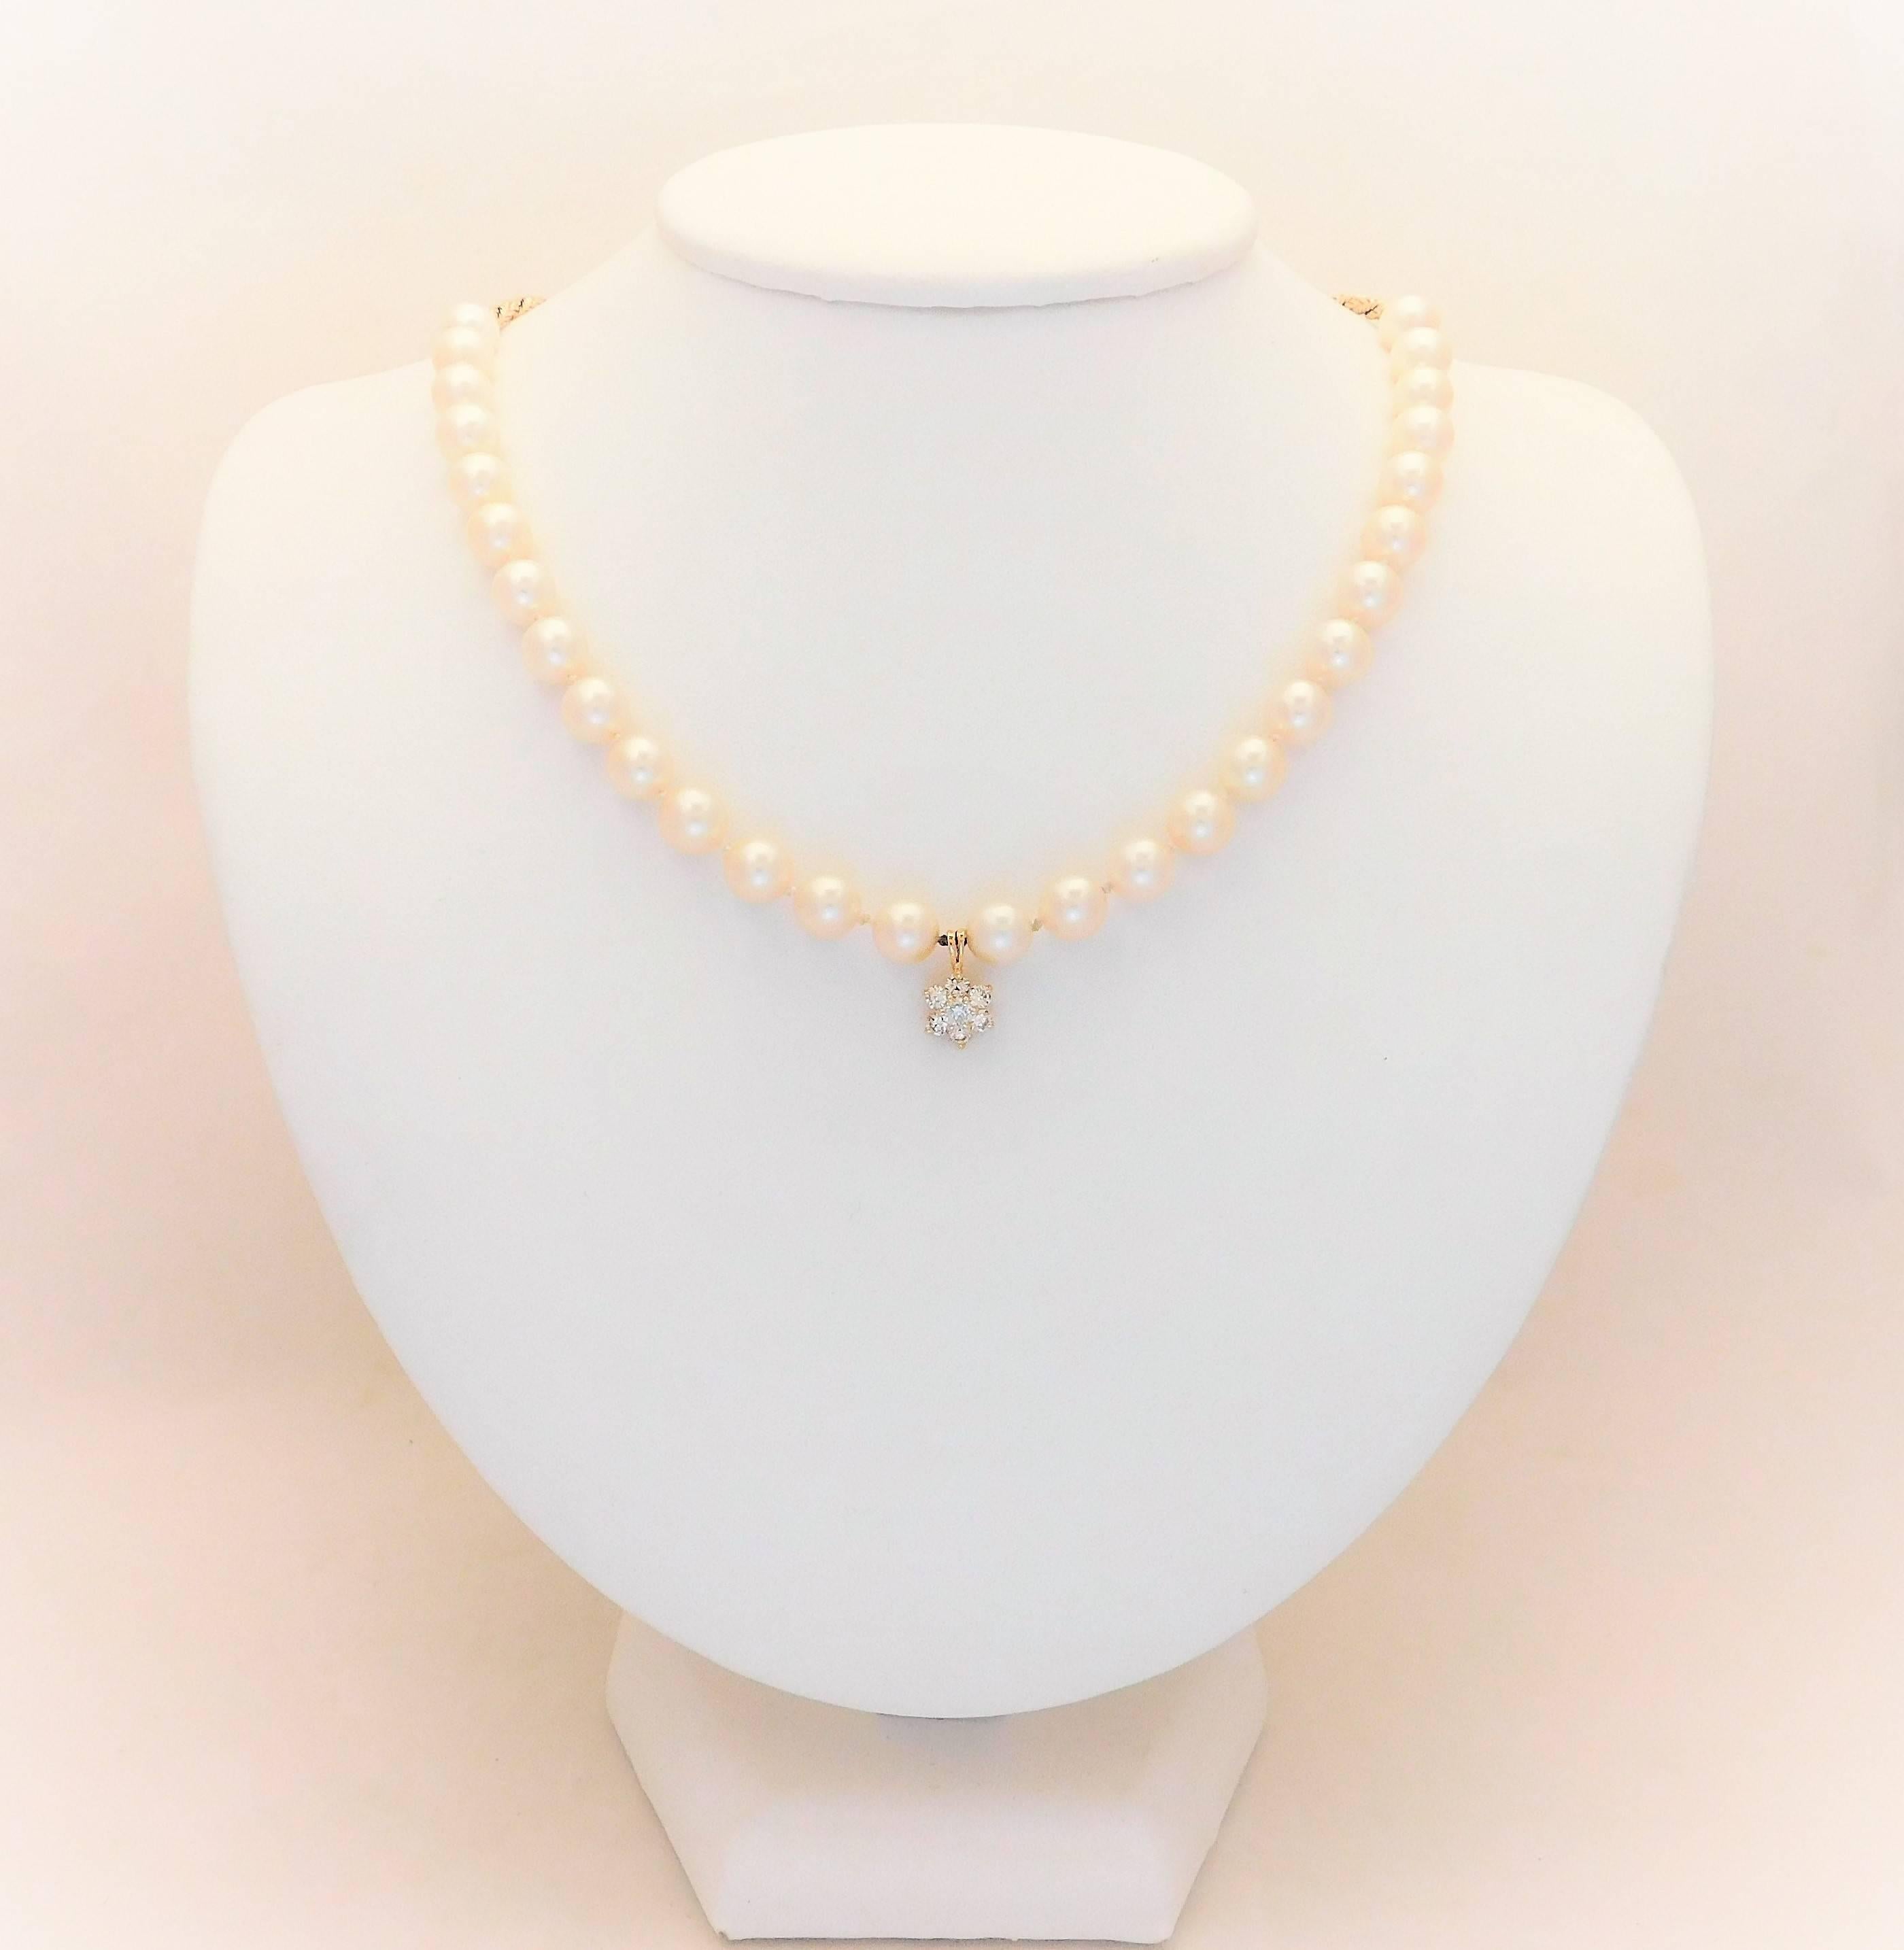 Made famous by influential women such as Jackie Onassis and Elizabeth Taylor. The white pearl necklace, still to this day, represents one of the most timeless staples in a lady’s wardrobe.  

From an exquisite Southern estate.  Circa 1950.  This